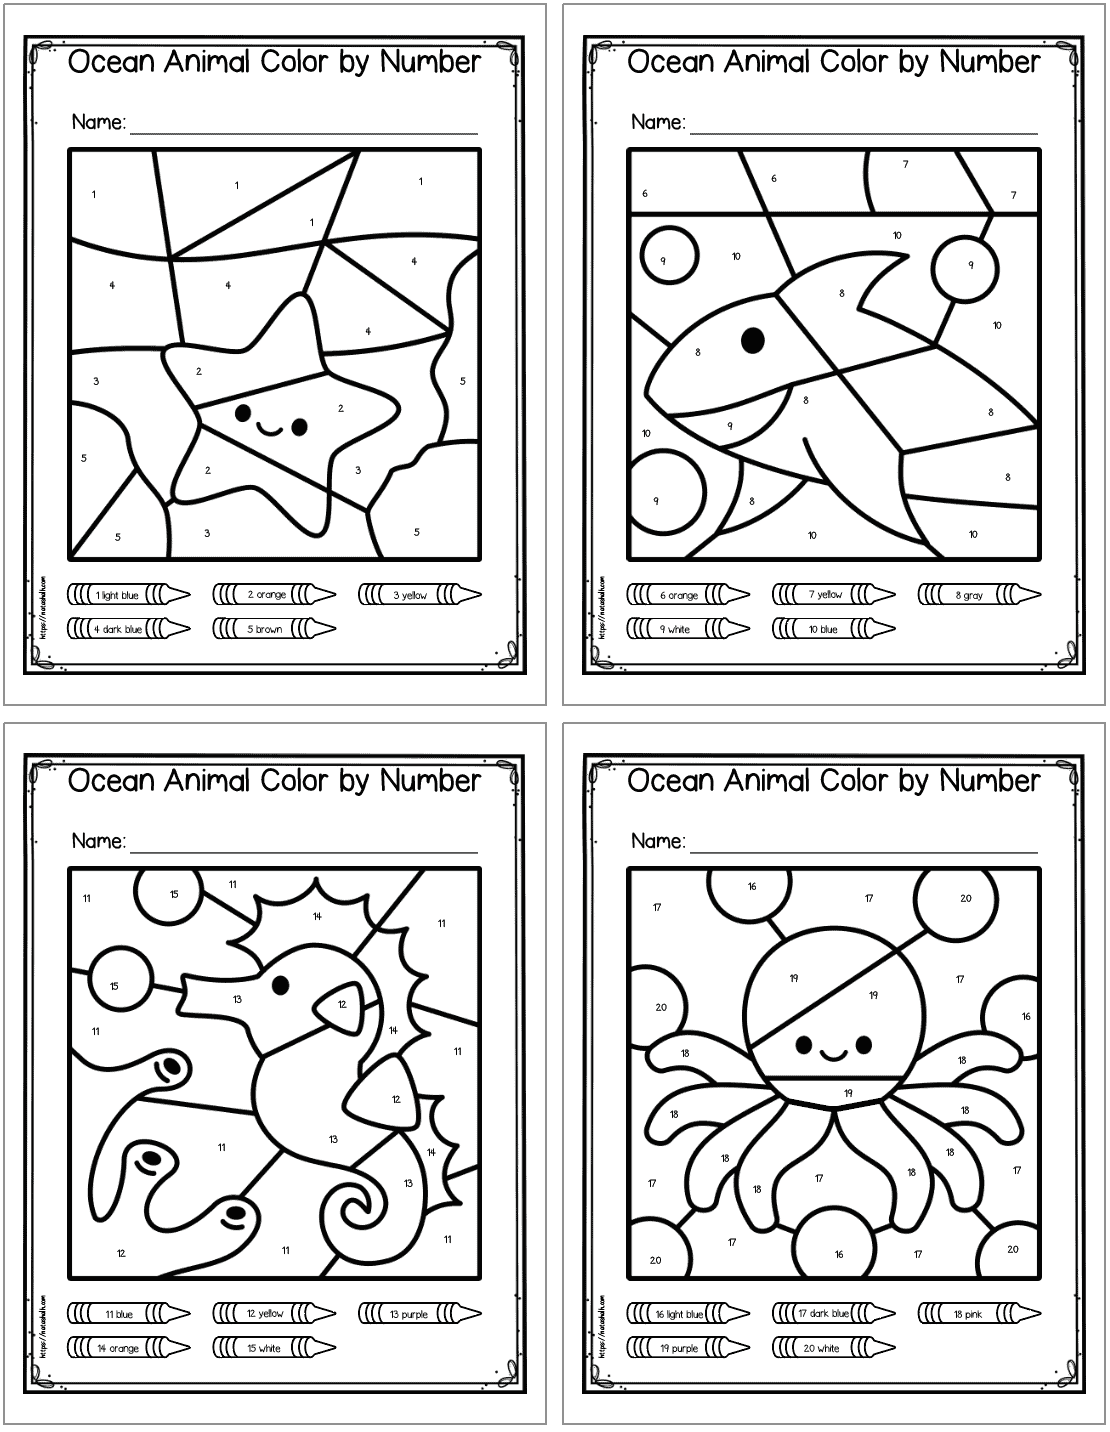 Four color by number pages. They show: a starfish, a shark, a seahorse, and an octopus